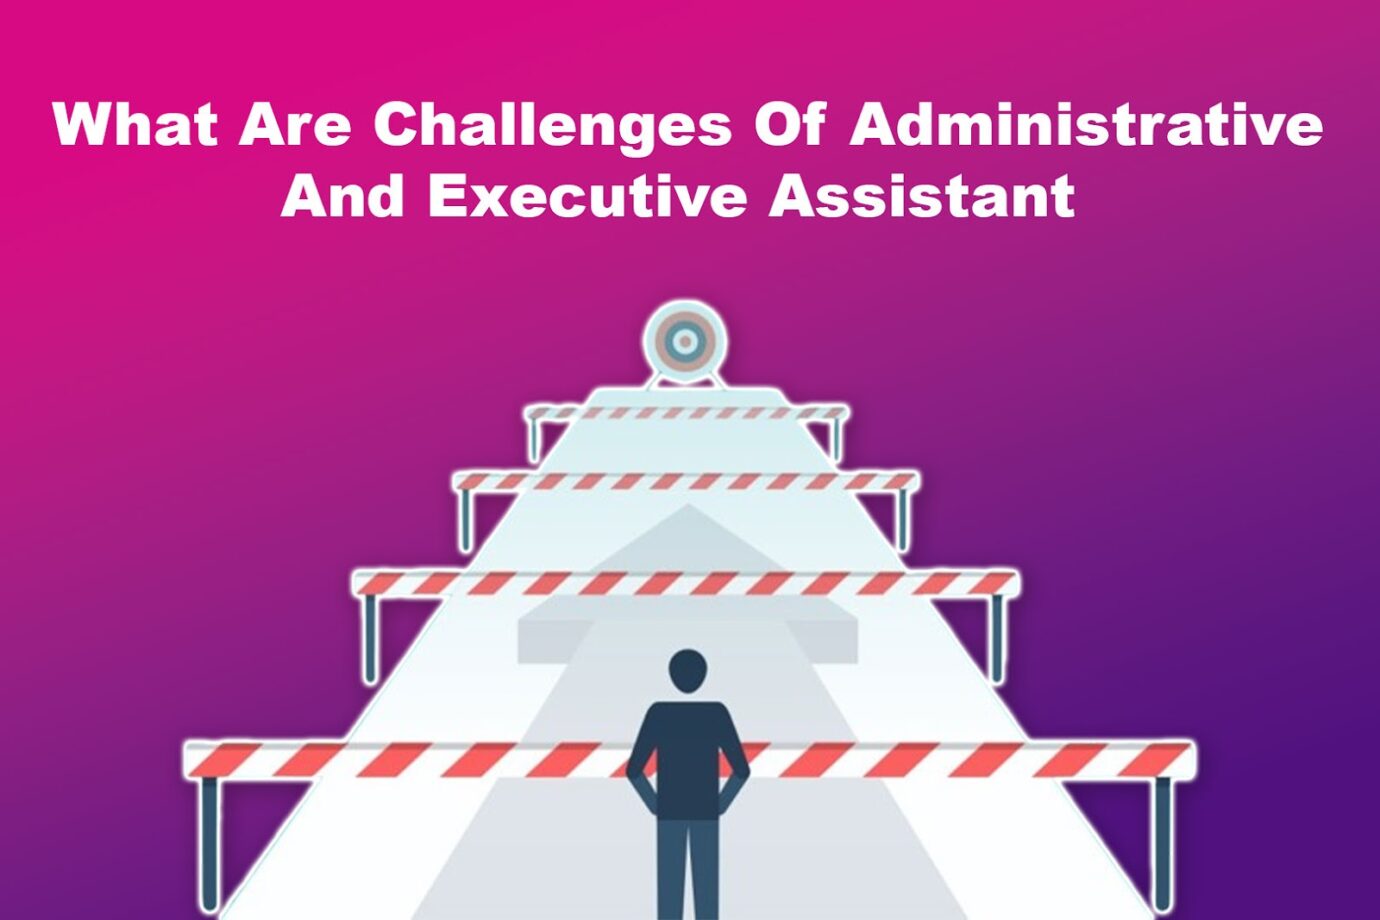 What Are Challenges Of Administrative And Executive Assistant